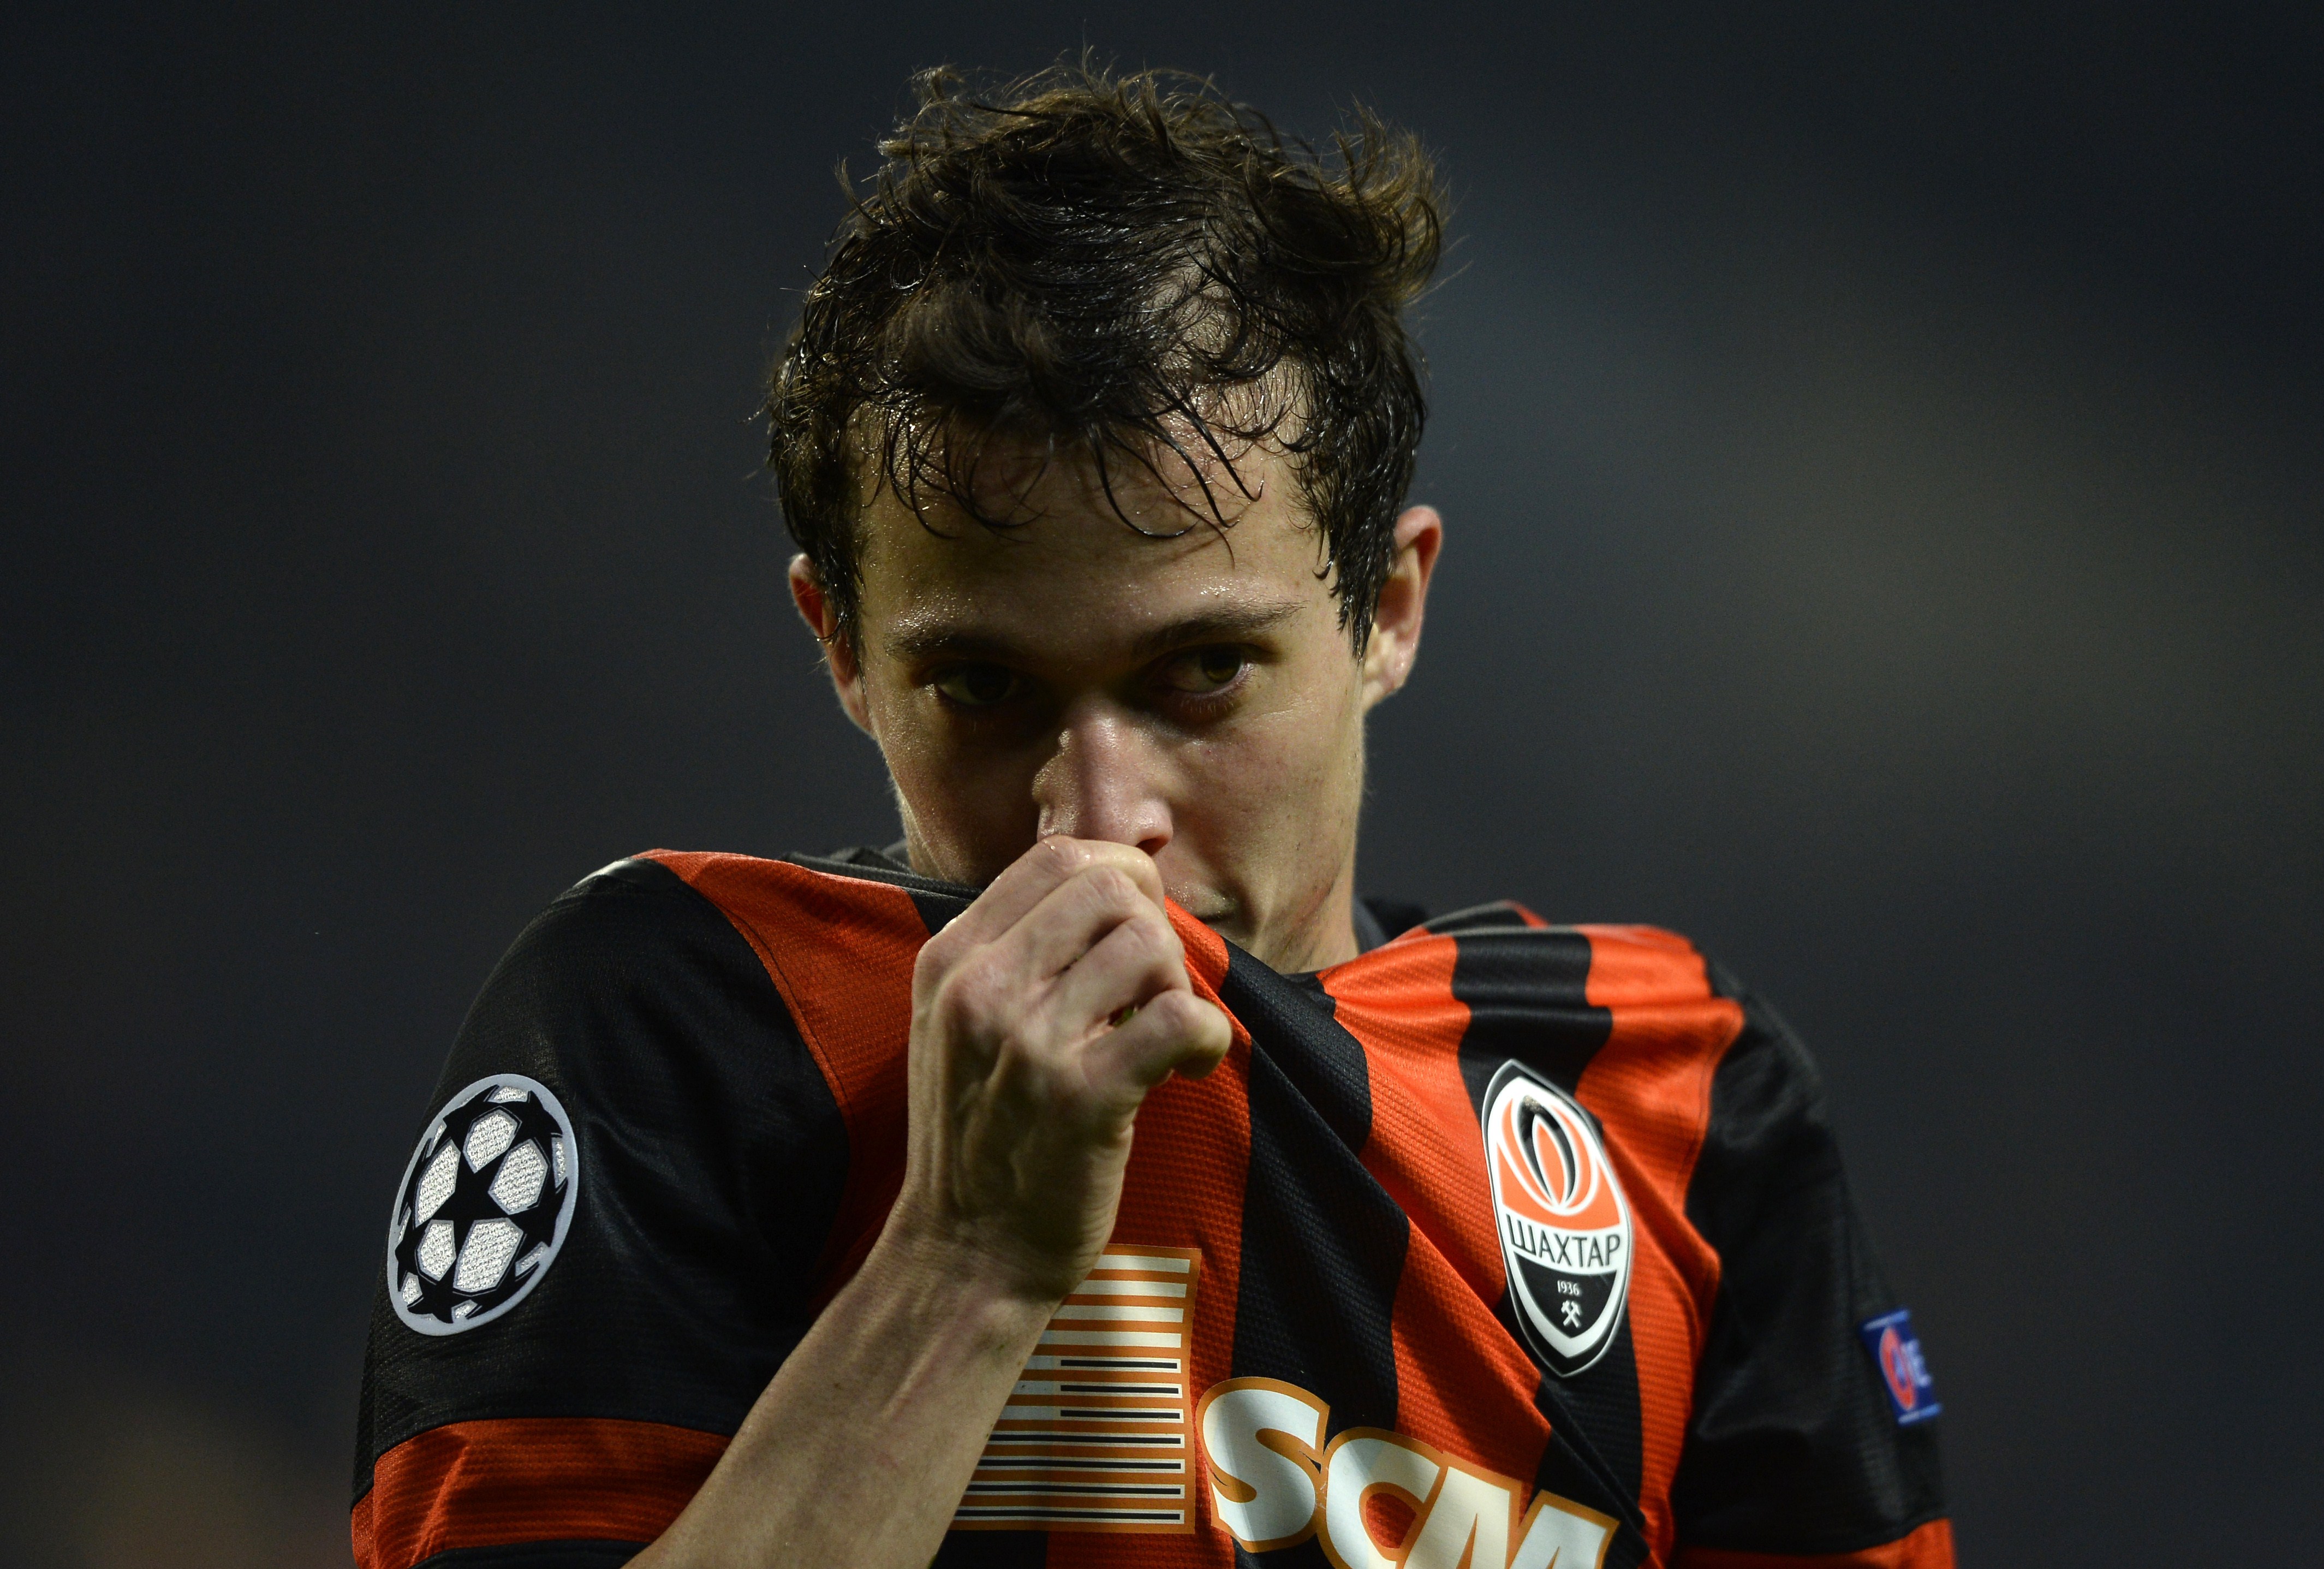 Shakhtar Donetsk's Brazilian midfielder Bernard reacts during the UEFA Champions League Group H football match FC Porto vs FC Shakhtar Donetsk at the Dragao stadium in Porto on December 10, 2014. The match finished with a draw 1-1. AFP PHOTO/ MIGUEL RIOPA        (Photo credit should read MIGUEL RIOPA/AFP/Getty Images)